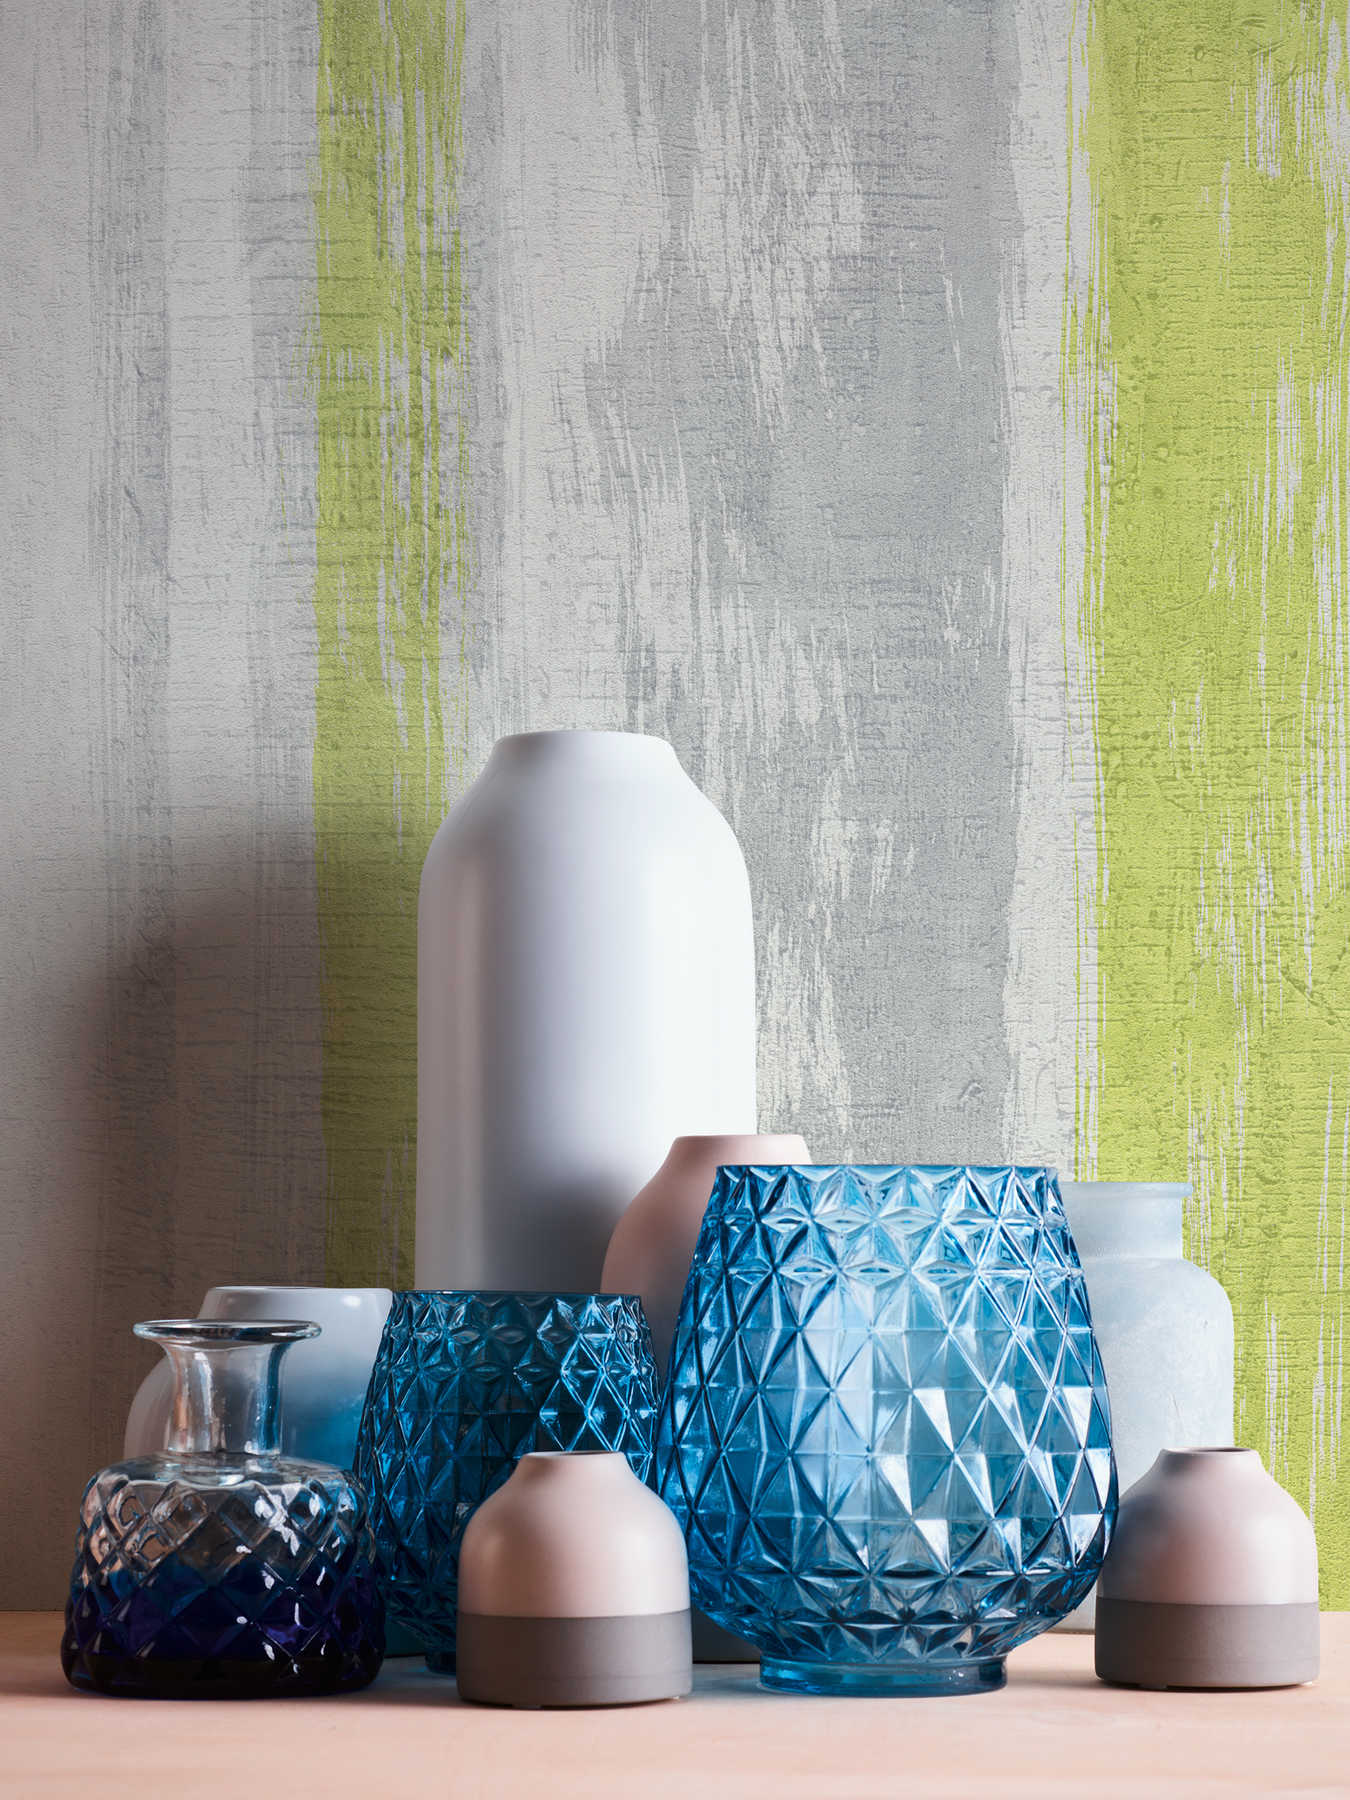             Striped wallpaper with plaster texture & coloured accent - grey, green, yellow
        